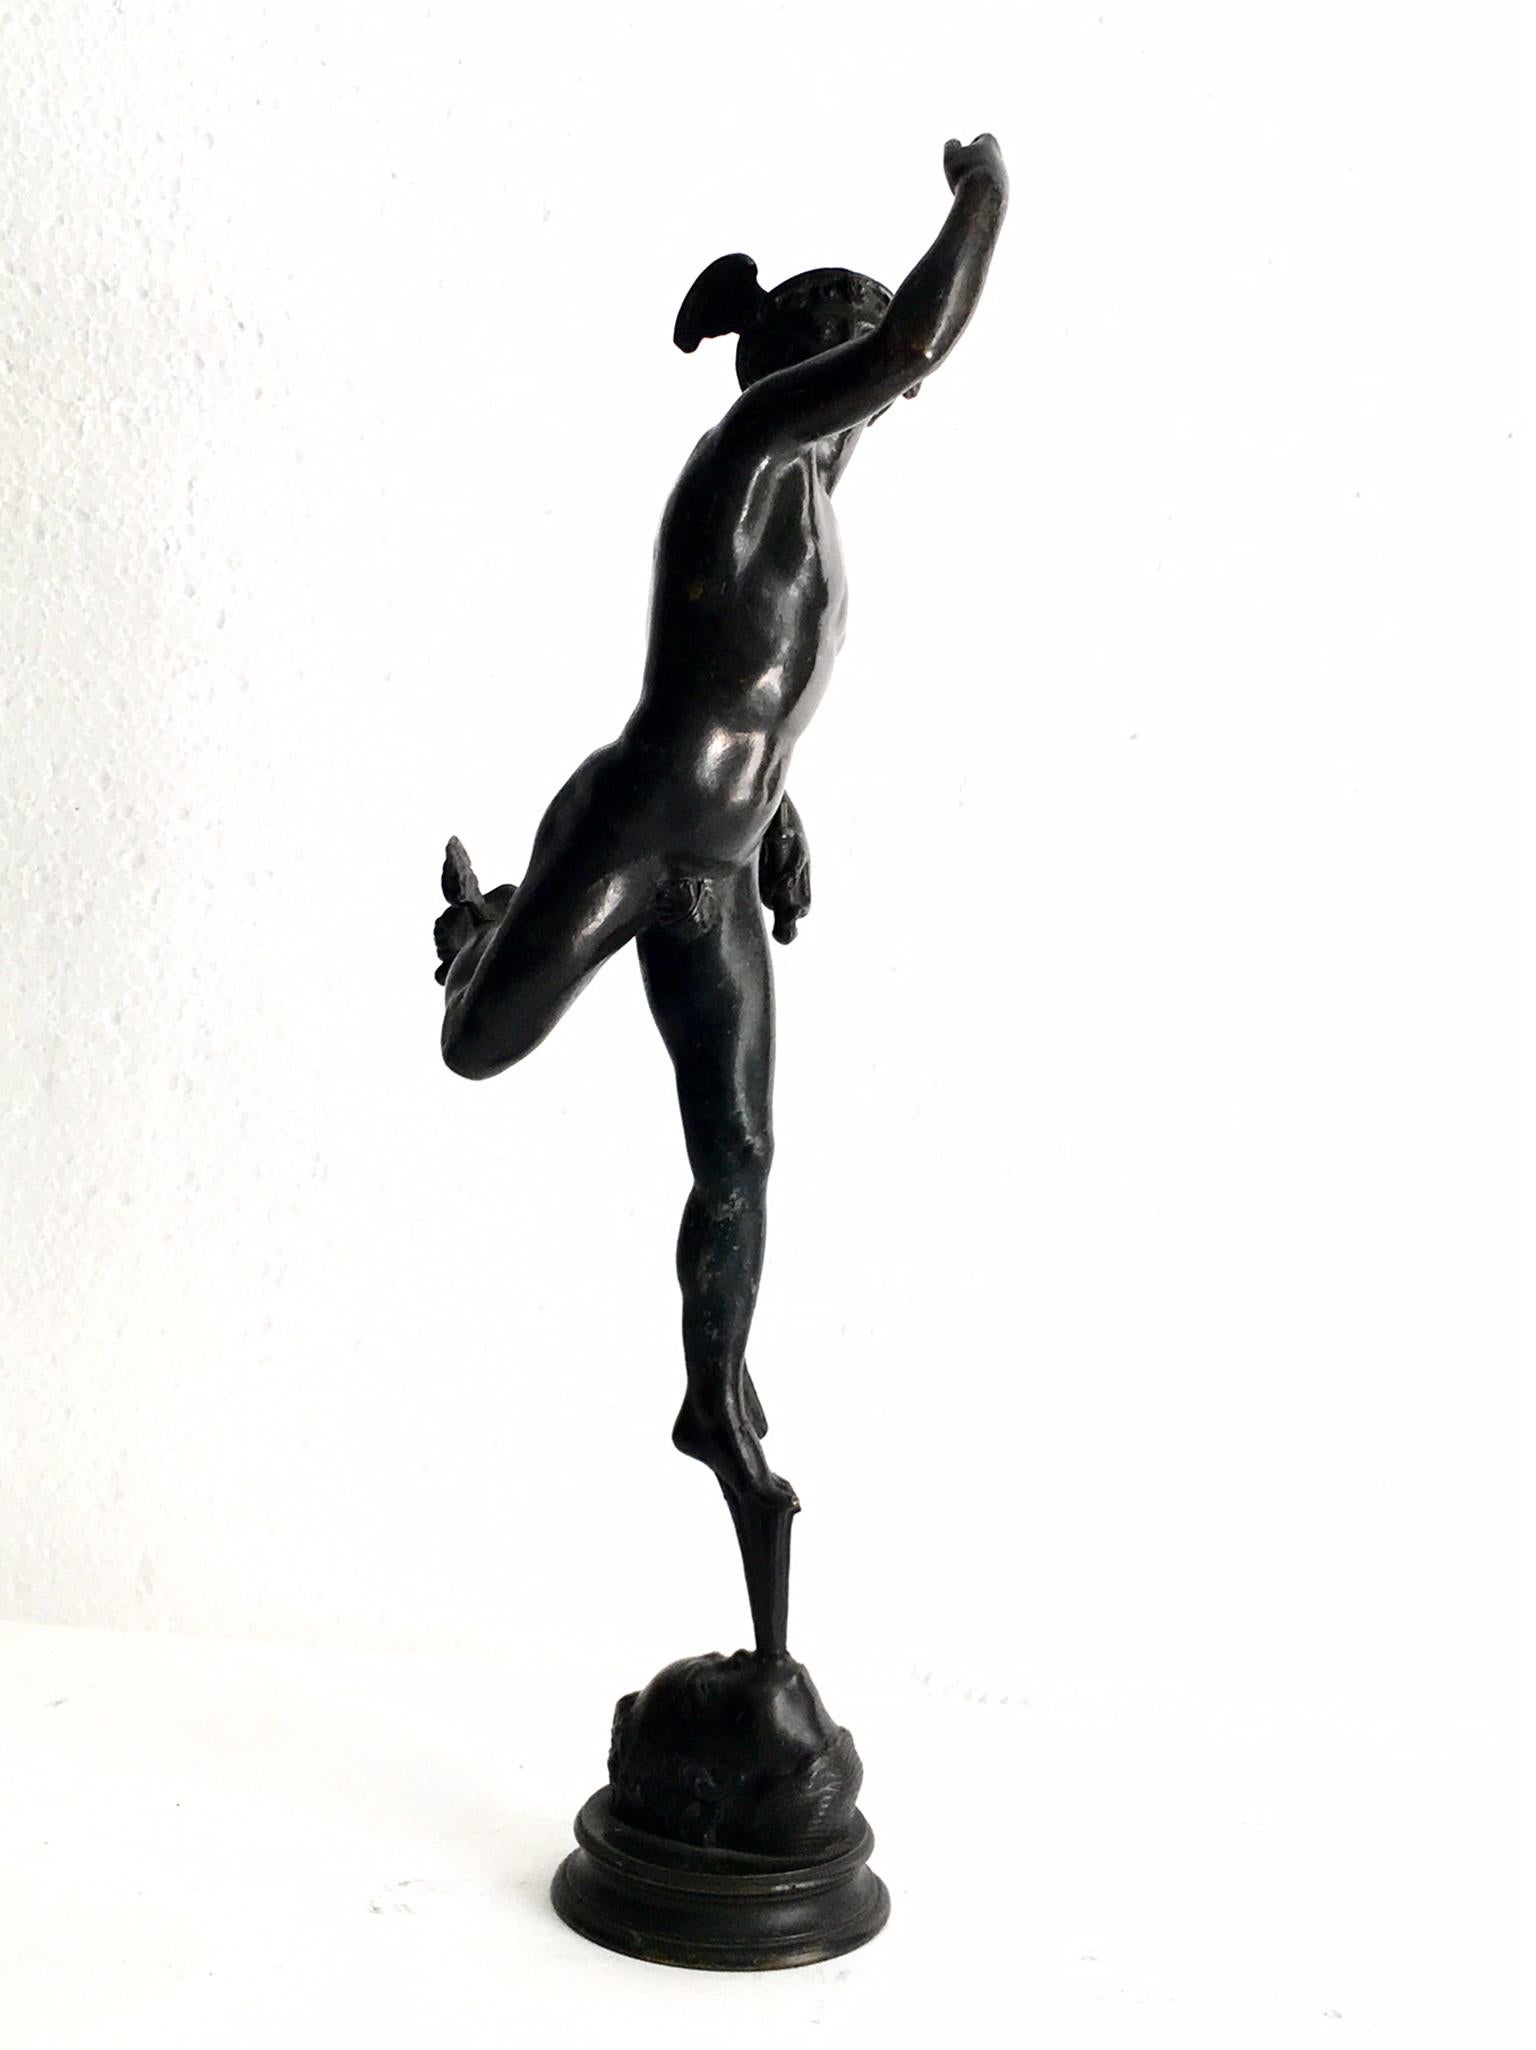 This bornce represents Mercury or Hermes, depending on the Roman or Greek denomination of the gods.
The original was sculpted by Giambologna in the 16th century, and this copy is one of those made as a souvenir in the time of the Grand Tour.
It is